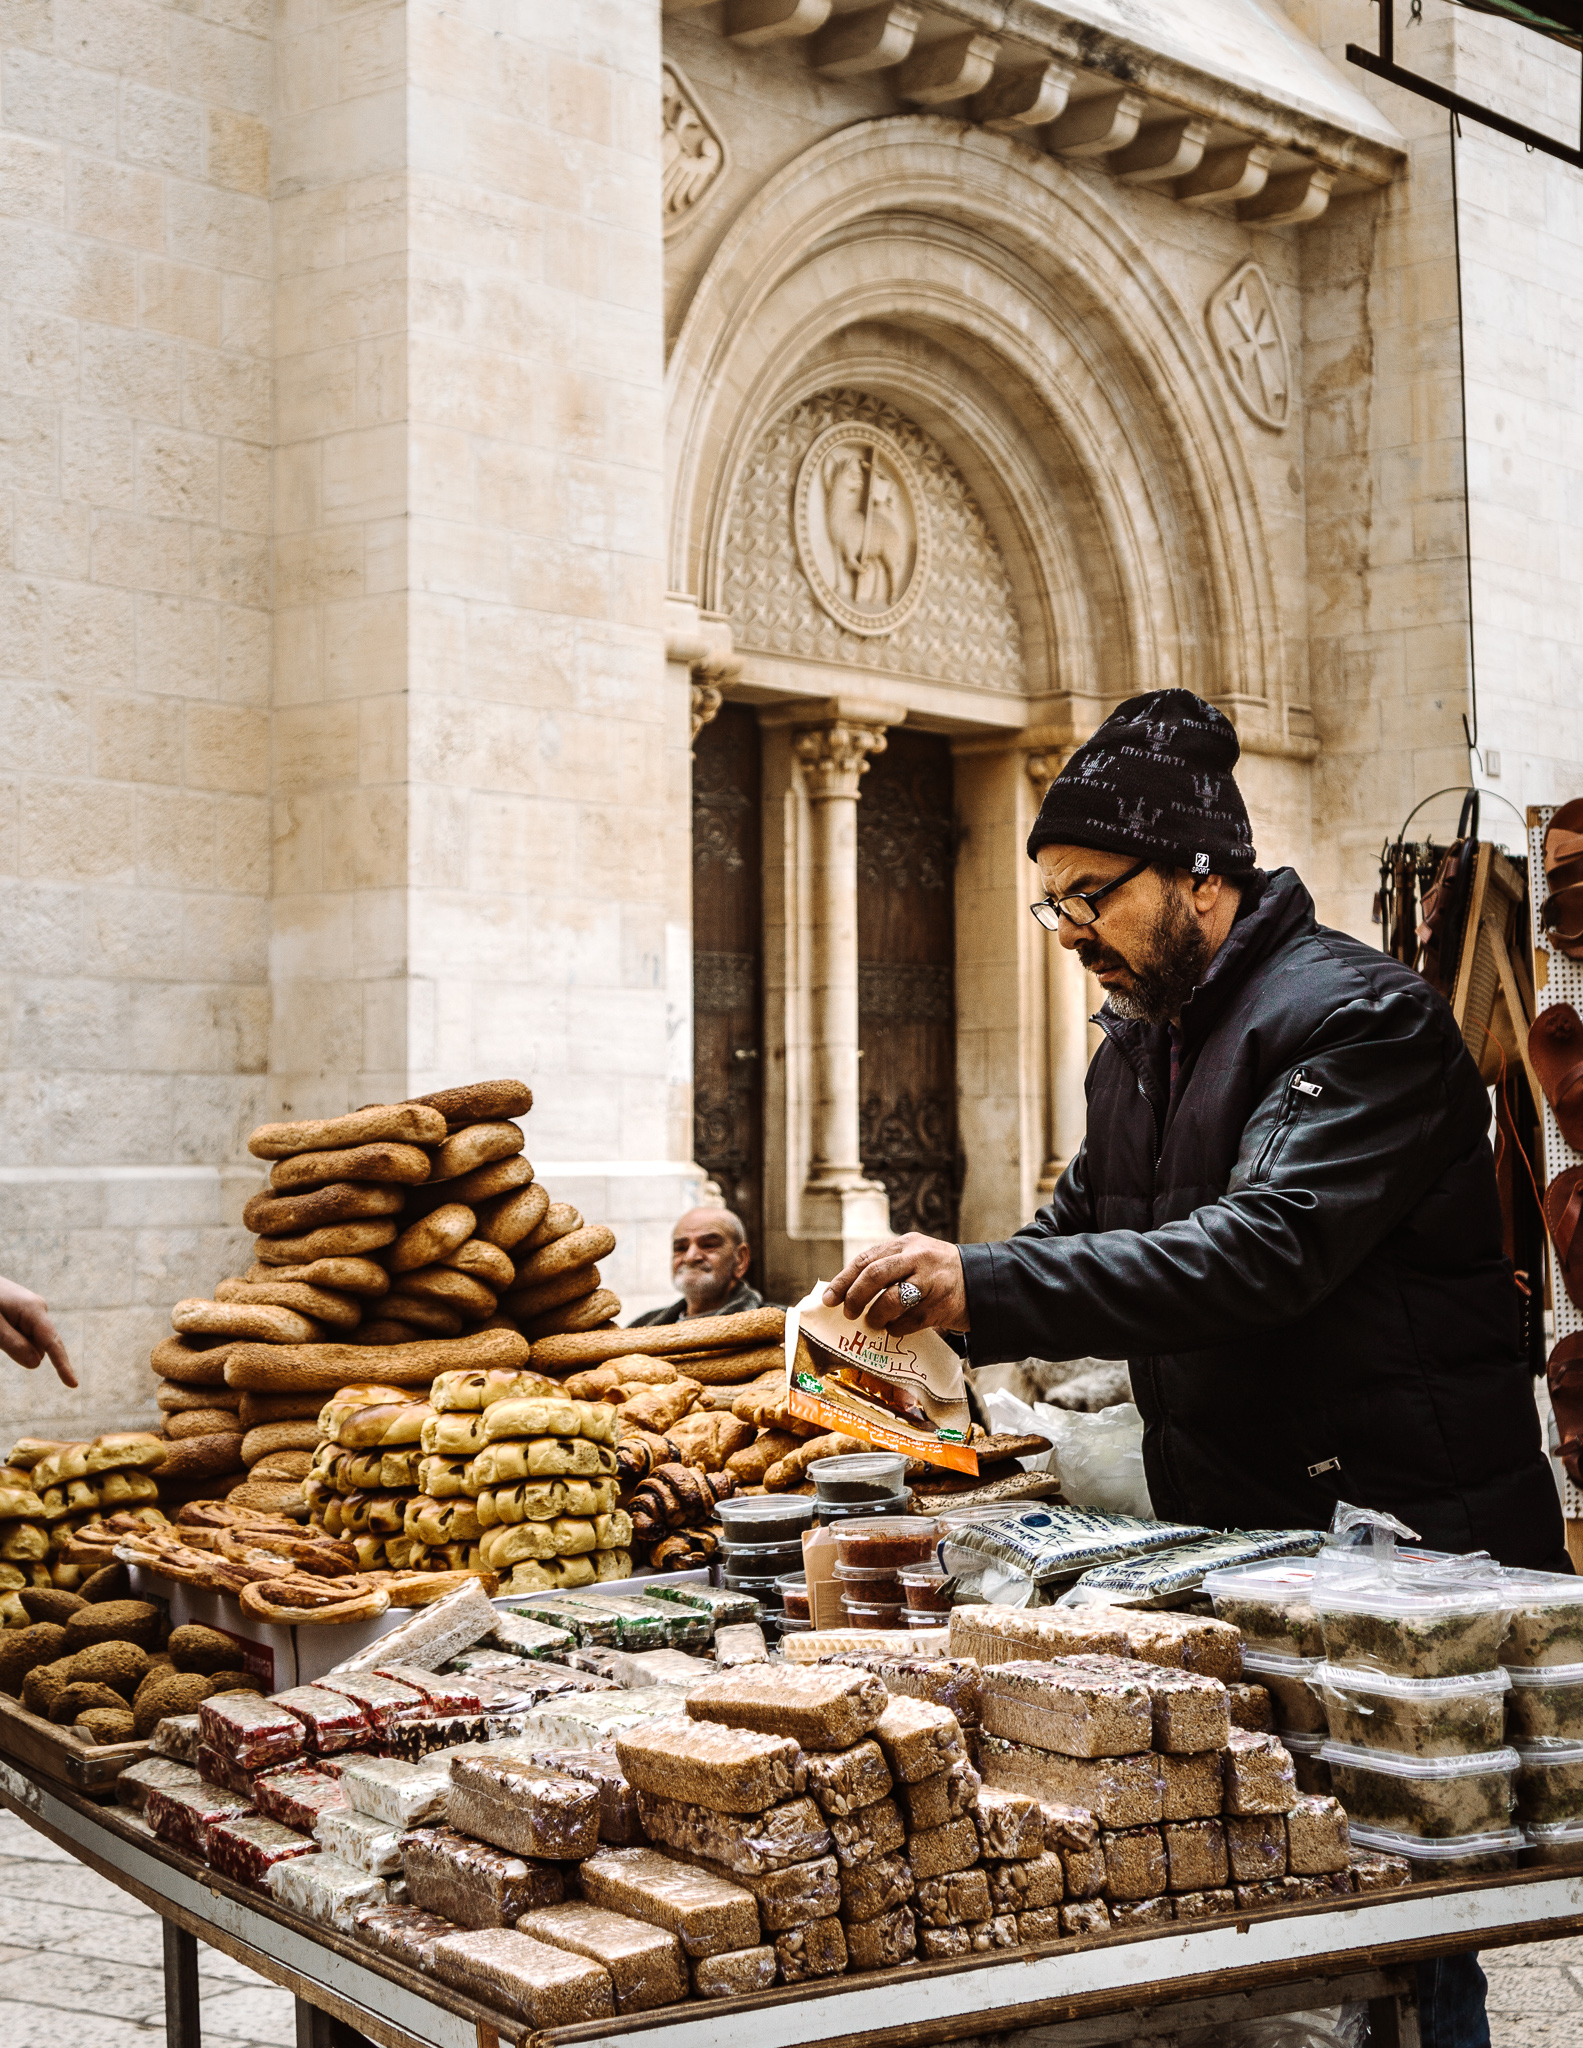 A man and a food cart selling Israeli sweets in the streets of Jerusalem